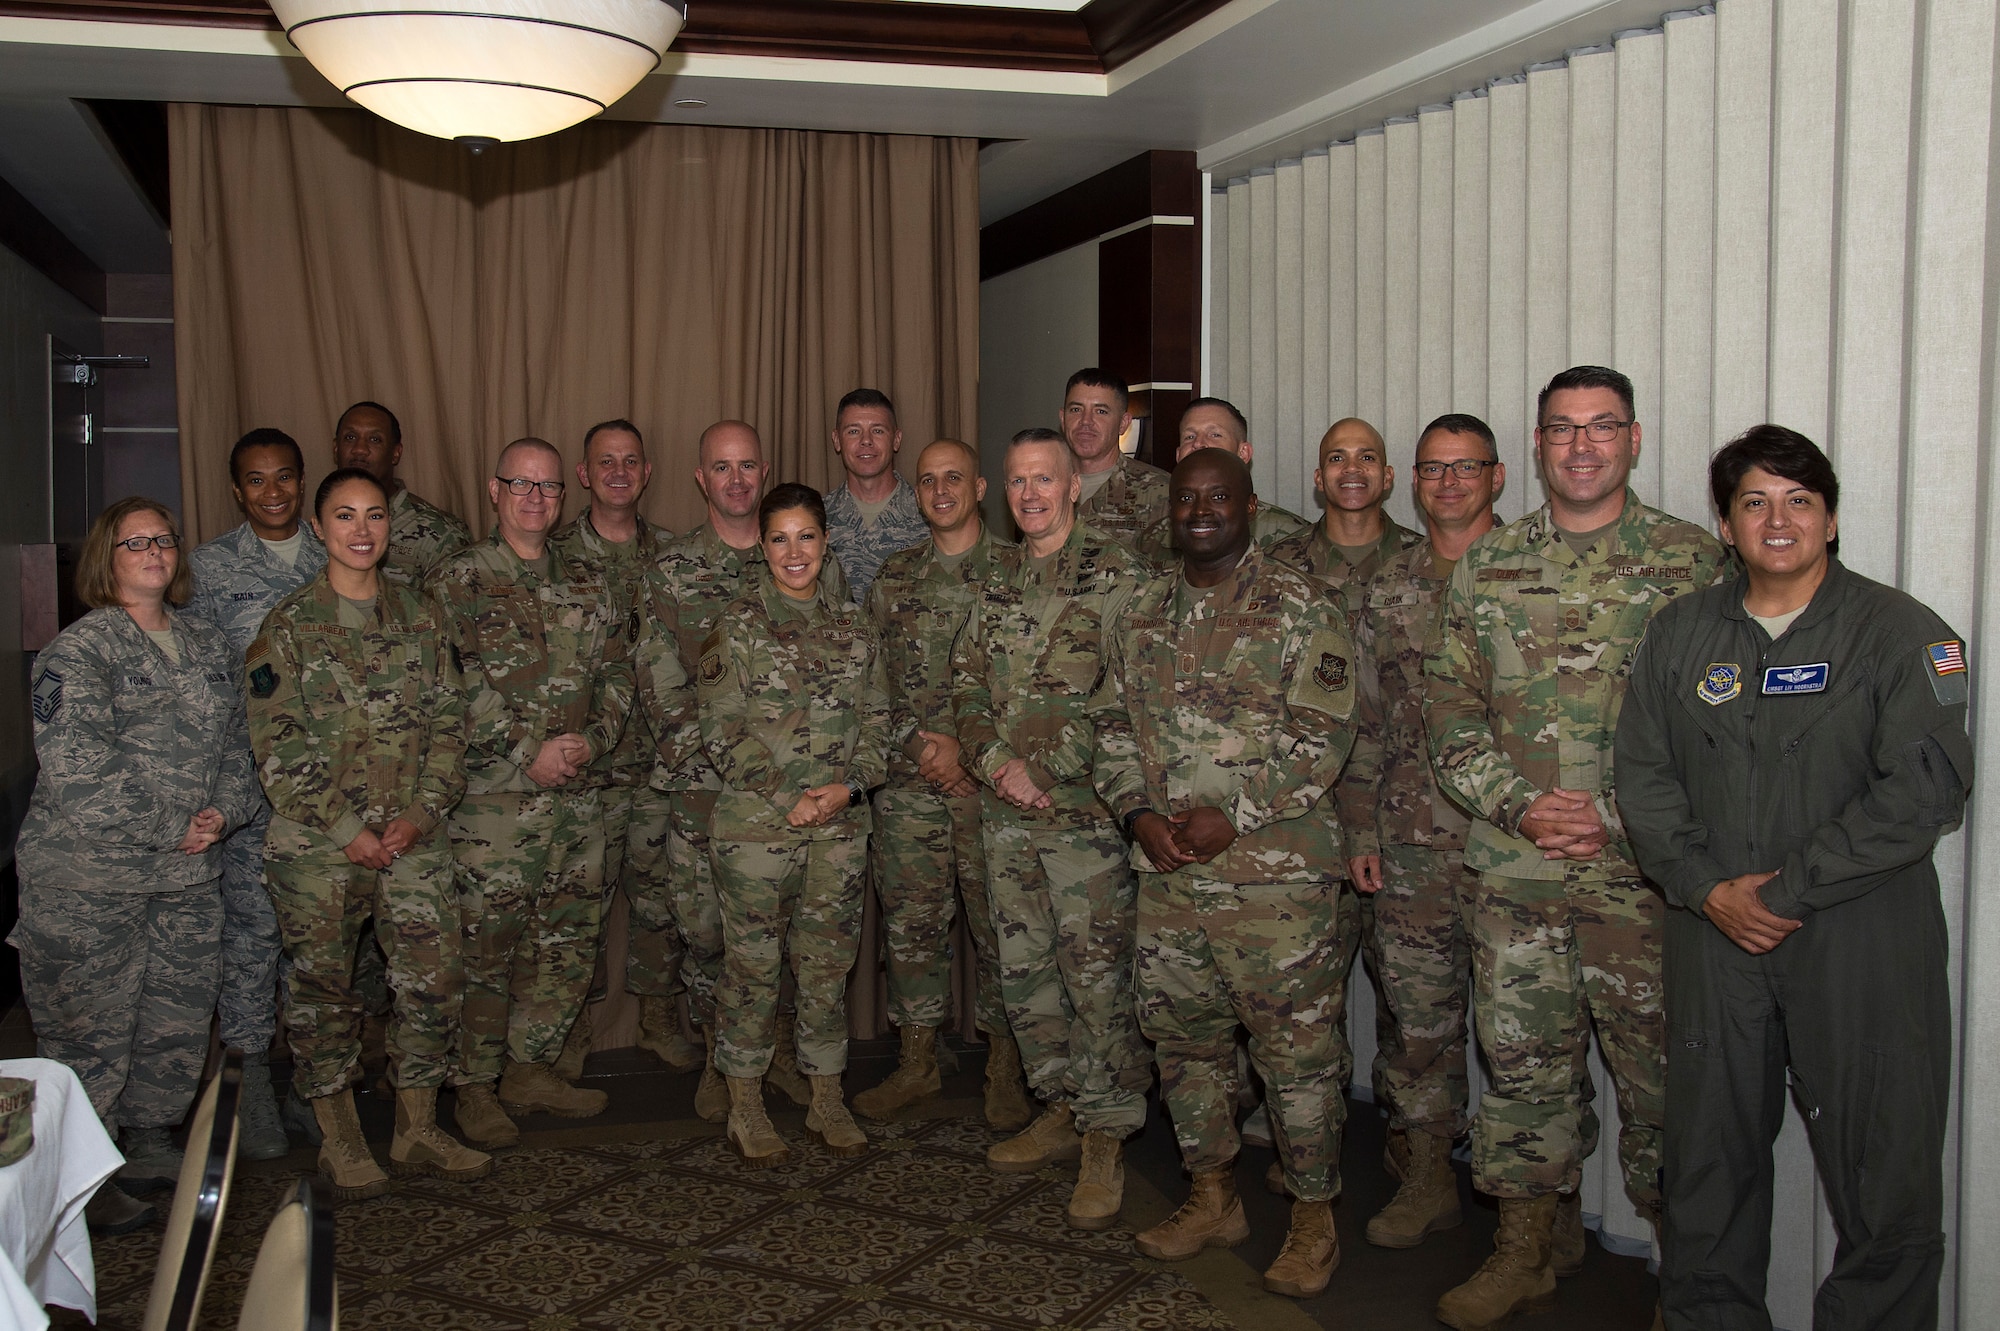 U.S. Army Command Sgt. Maj. John W. Troxell, senior enlisted advisor to the chairman of the Joint Chiefs of Staff, stands for a photo with members of MacDill’s senior enlisted leadership, July 11, 2019, at MacDill Air Force Base, Fla.  Troxell met with several units to monitor readiness and morale, while touring MacDill. (U.S. Air Force photo by Airman 1st Class Shannon Bowman)